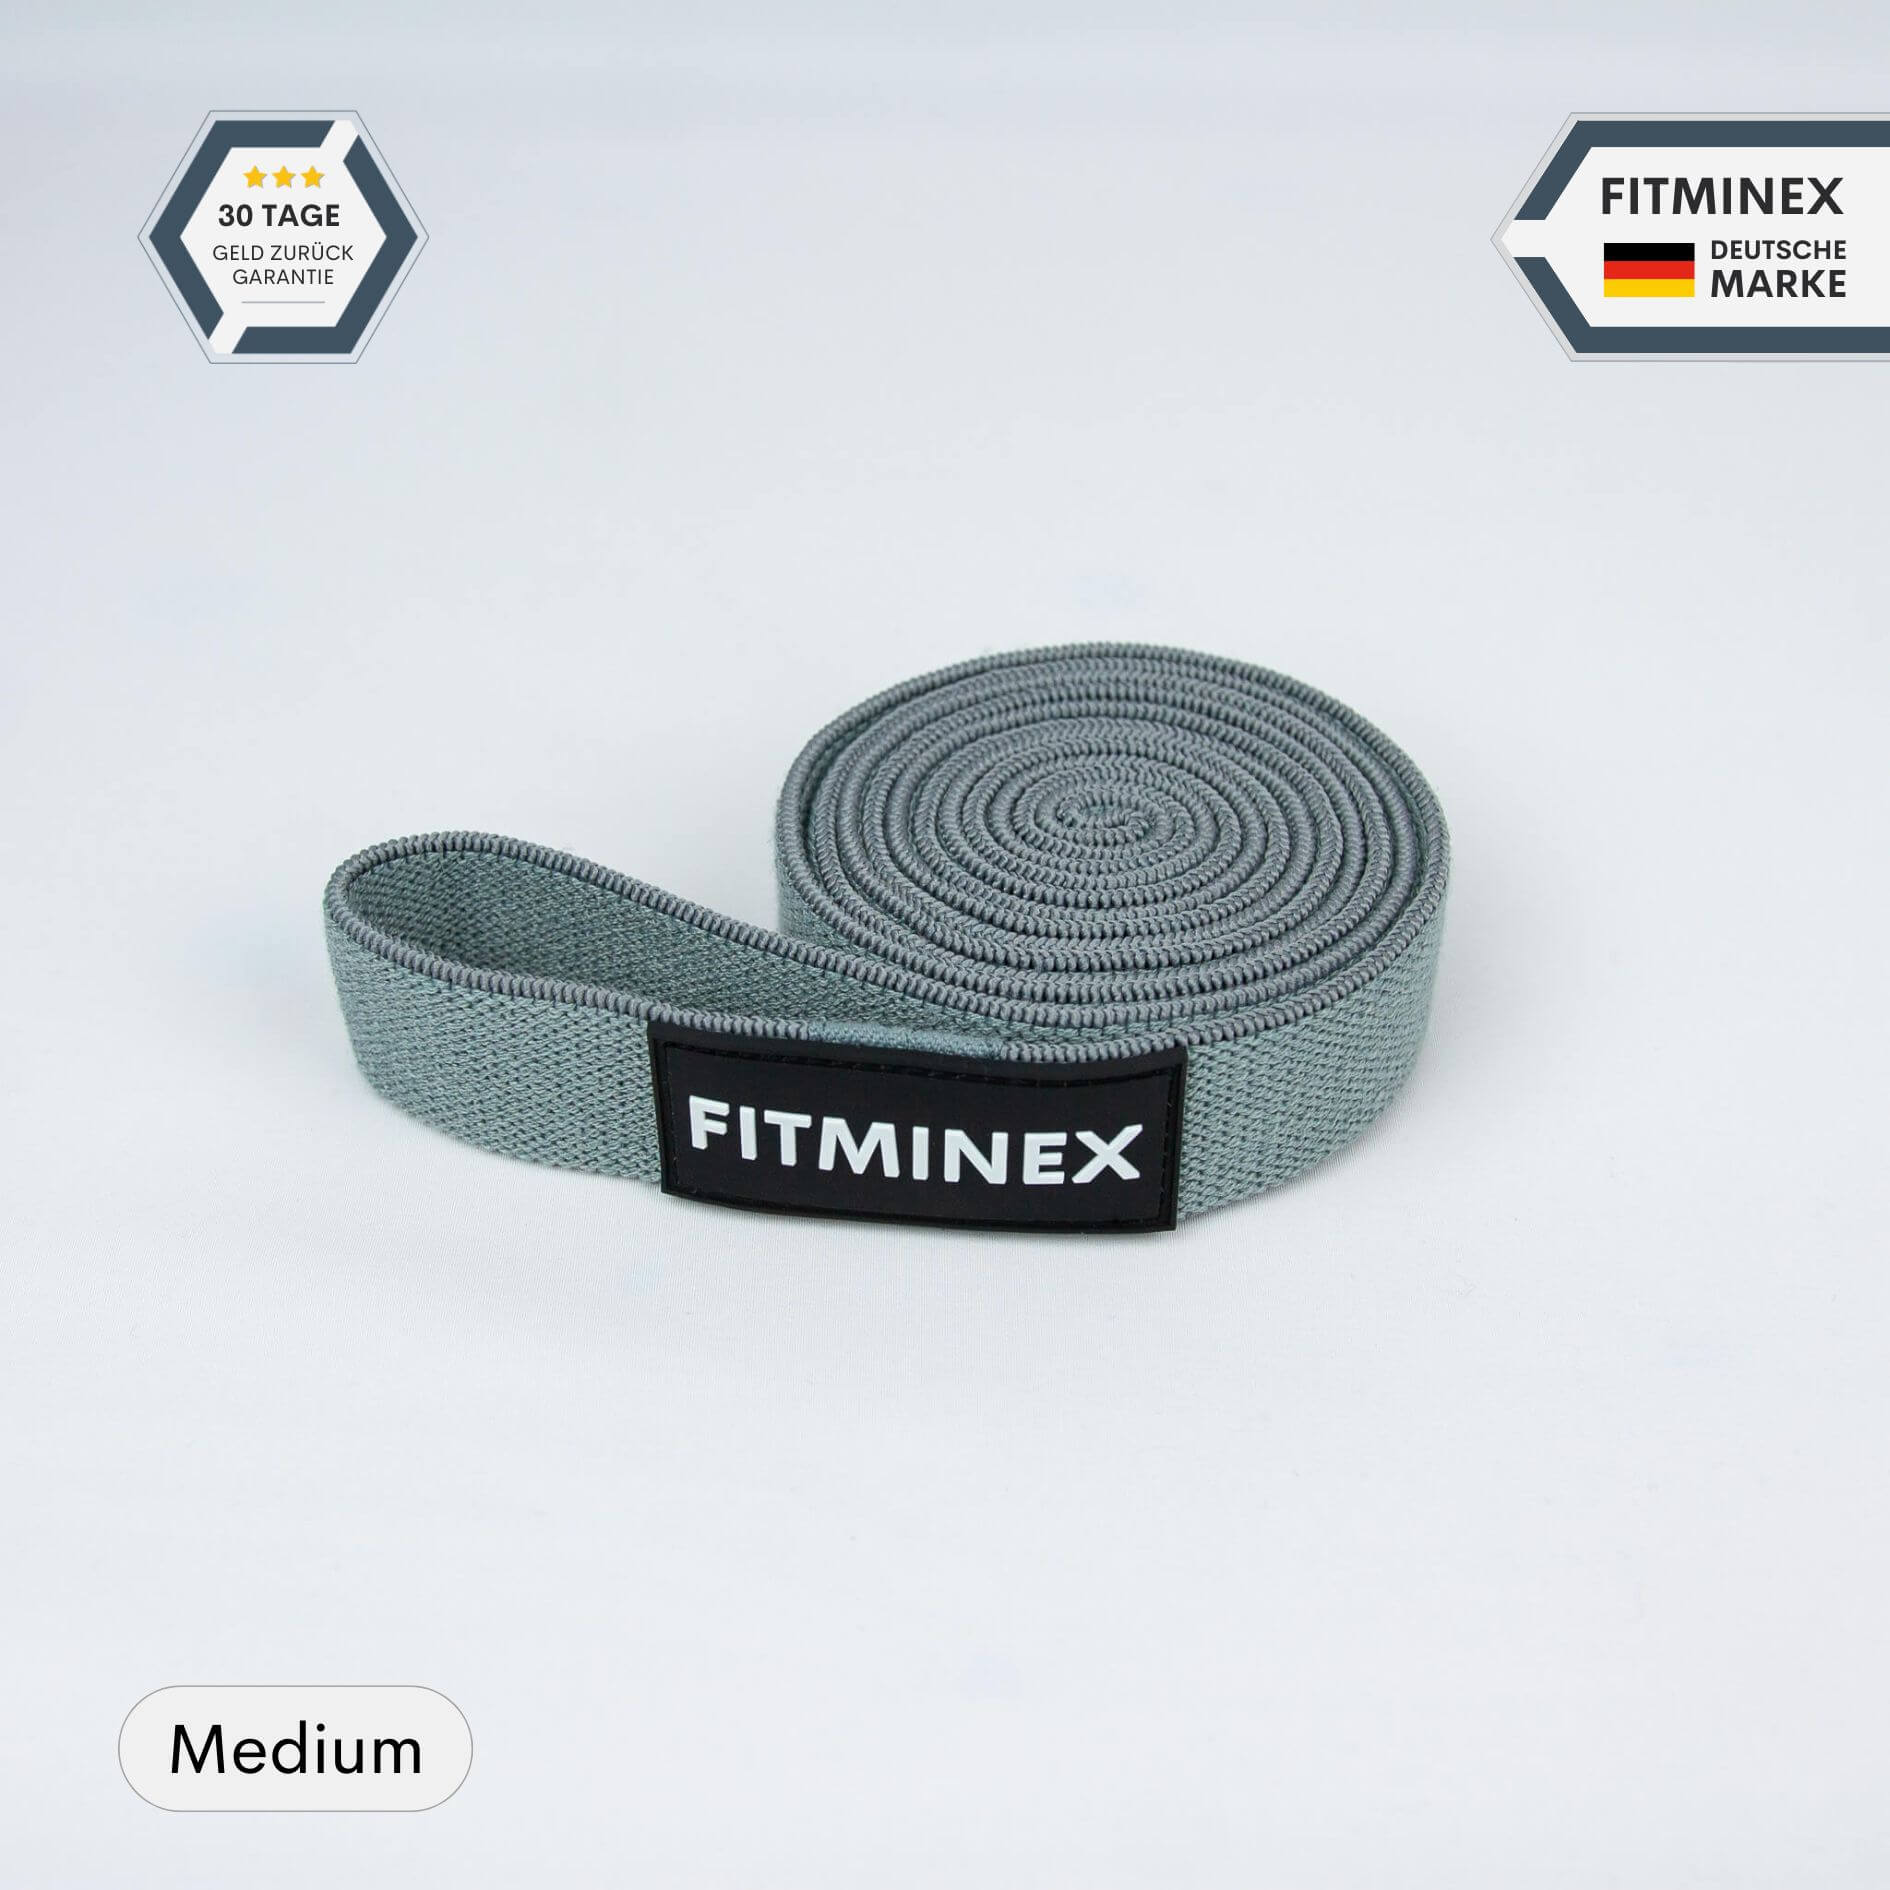 FITMINEX Fitnessband Resistance Band